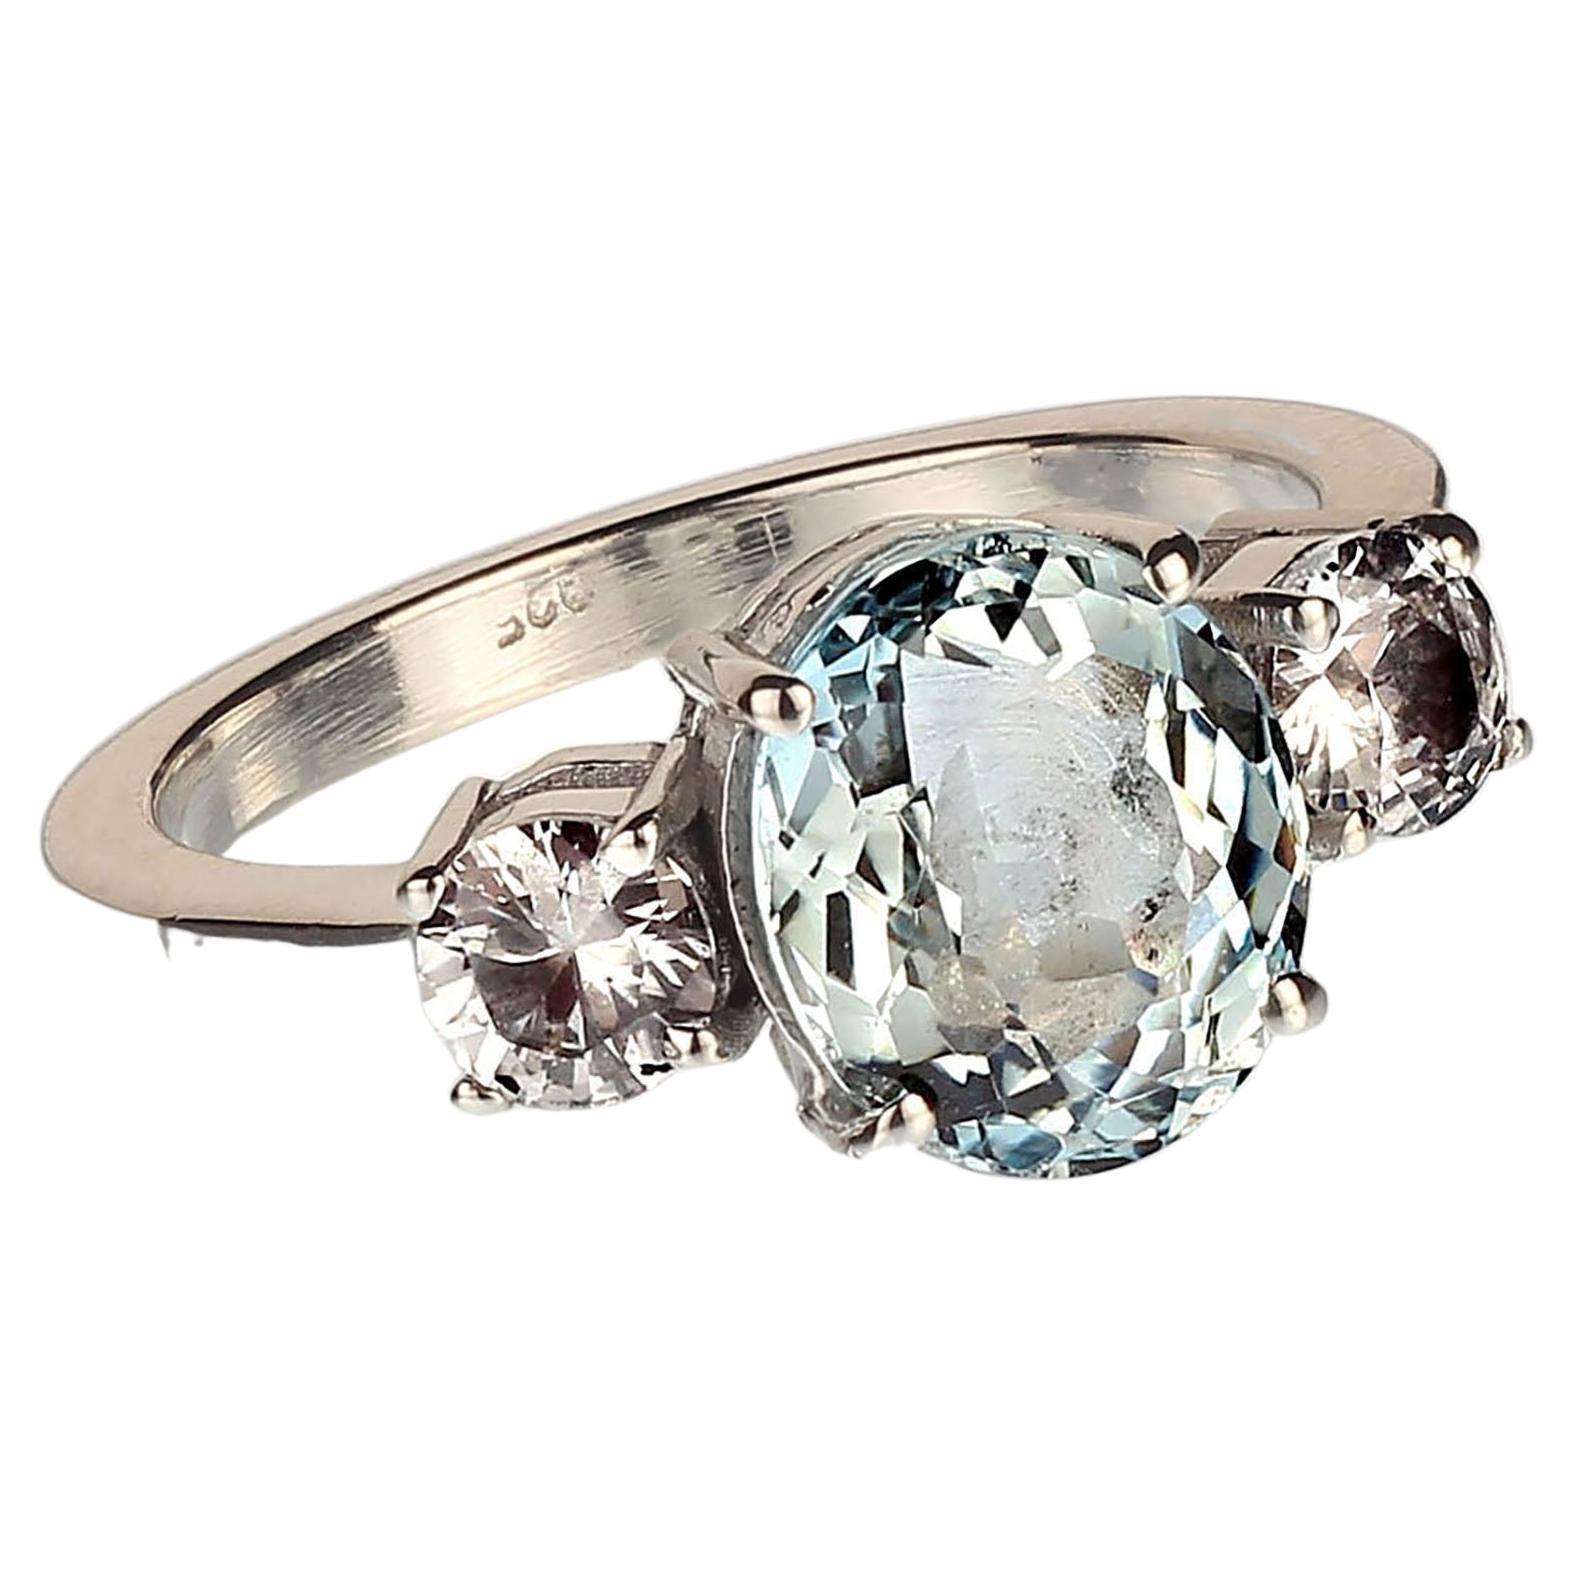 Artisan AJD 2.8ct Sparkling Oval Aquamarine and White Sapphire in Sterling Silver Ring